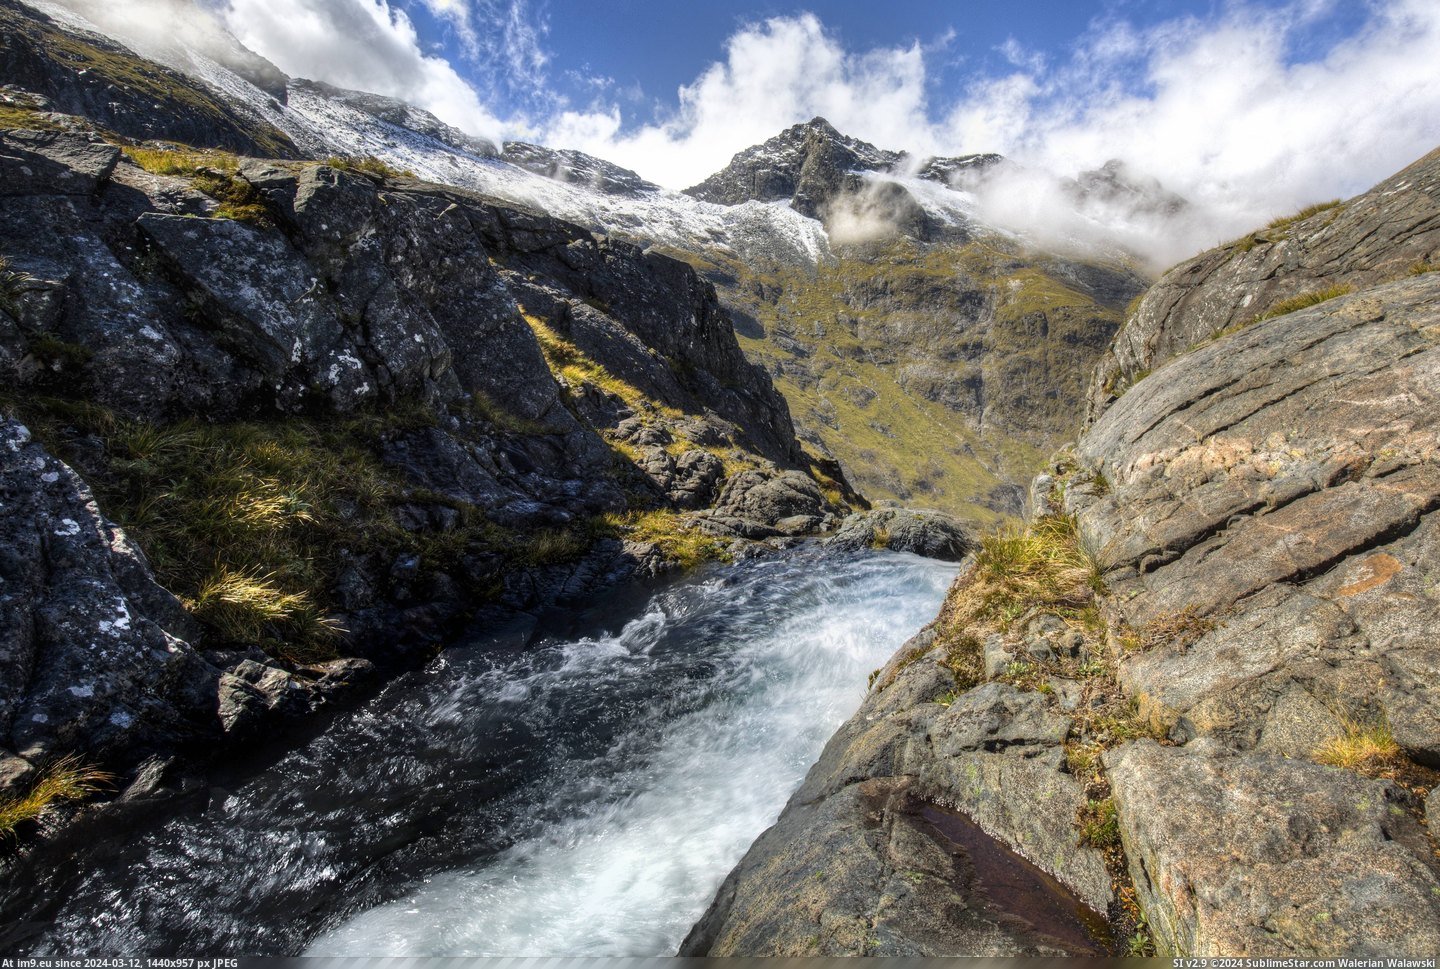 #Park #National #Fiordland #Crest #Earl #Mountains #Falls [Earthporn] At the crest of Bowmar Falls, Fiordland National Park, NZ, looking across to the Earl Mountains  [5191x3461] Pic. (Obraz z album My r/EARTHPORN favs))